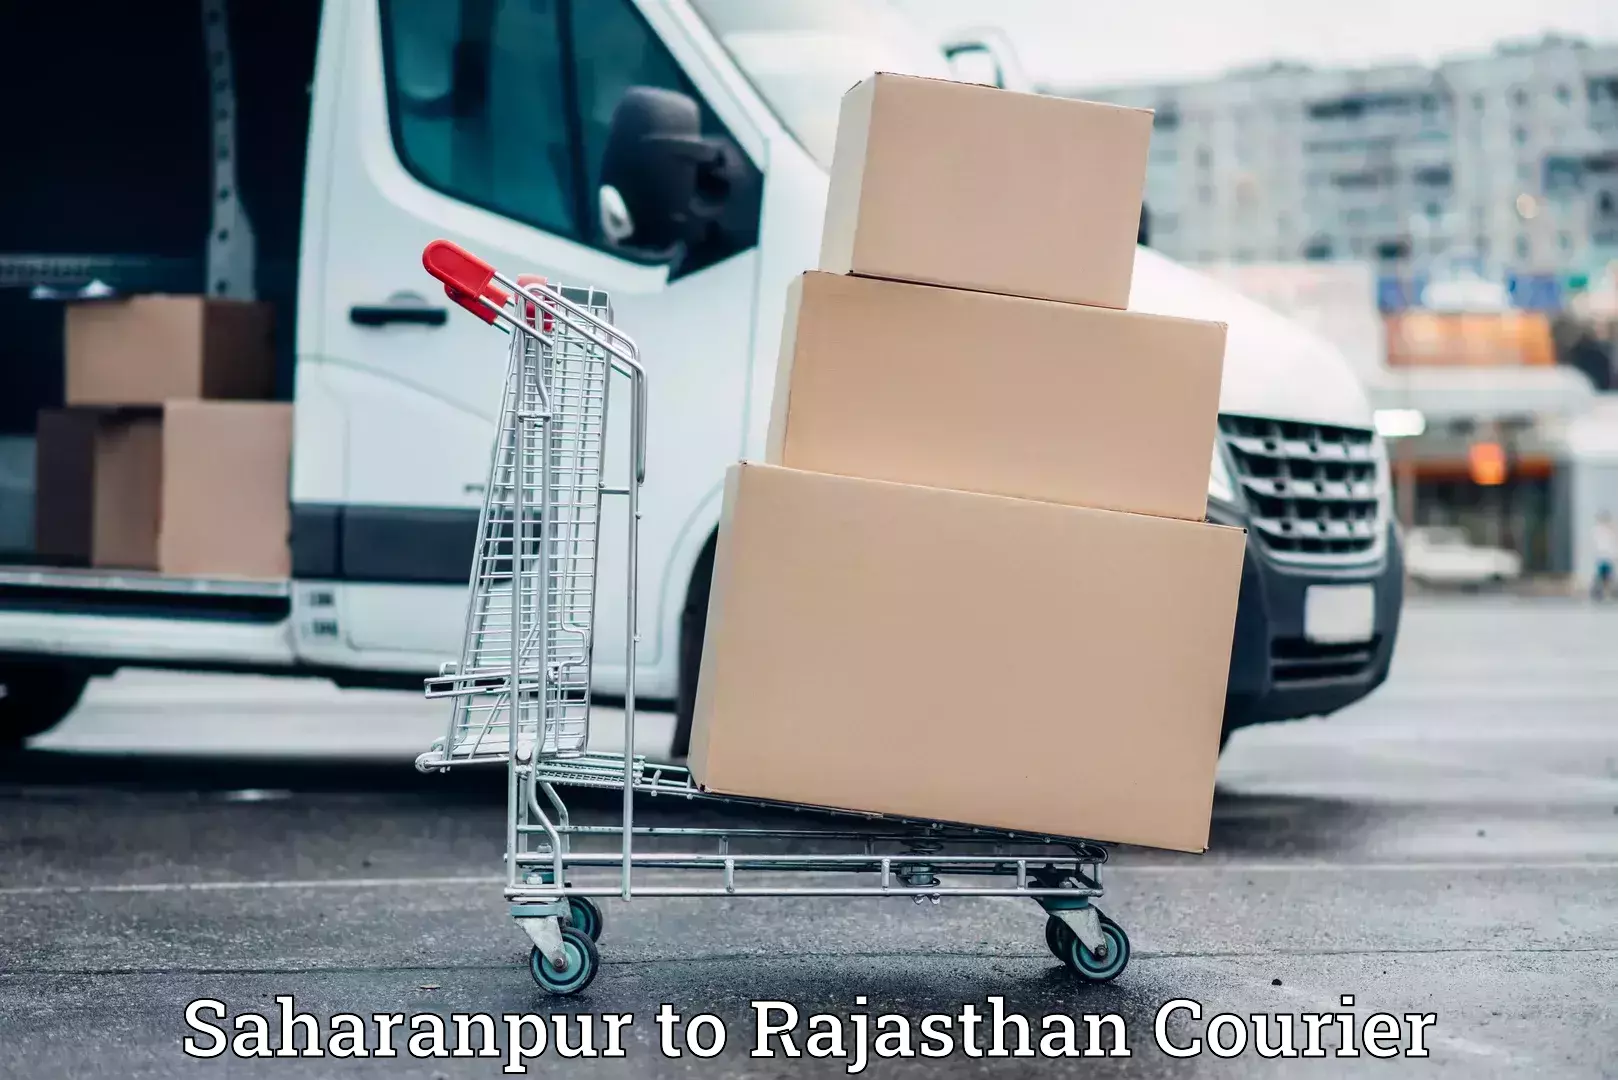 Furniture transport specialists Saharanpur to Rajasthan